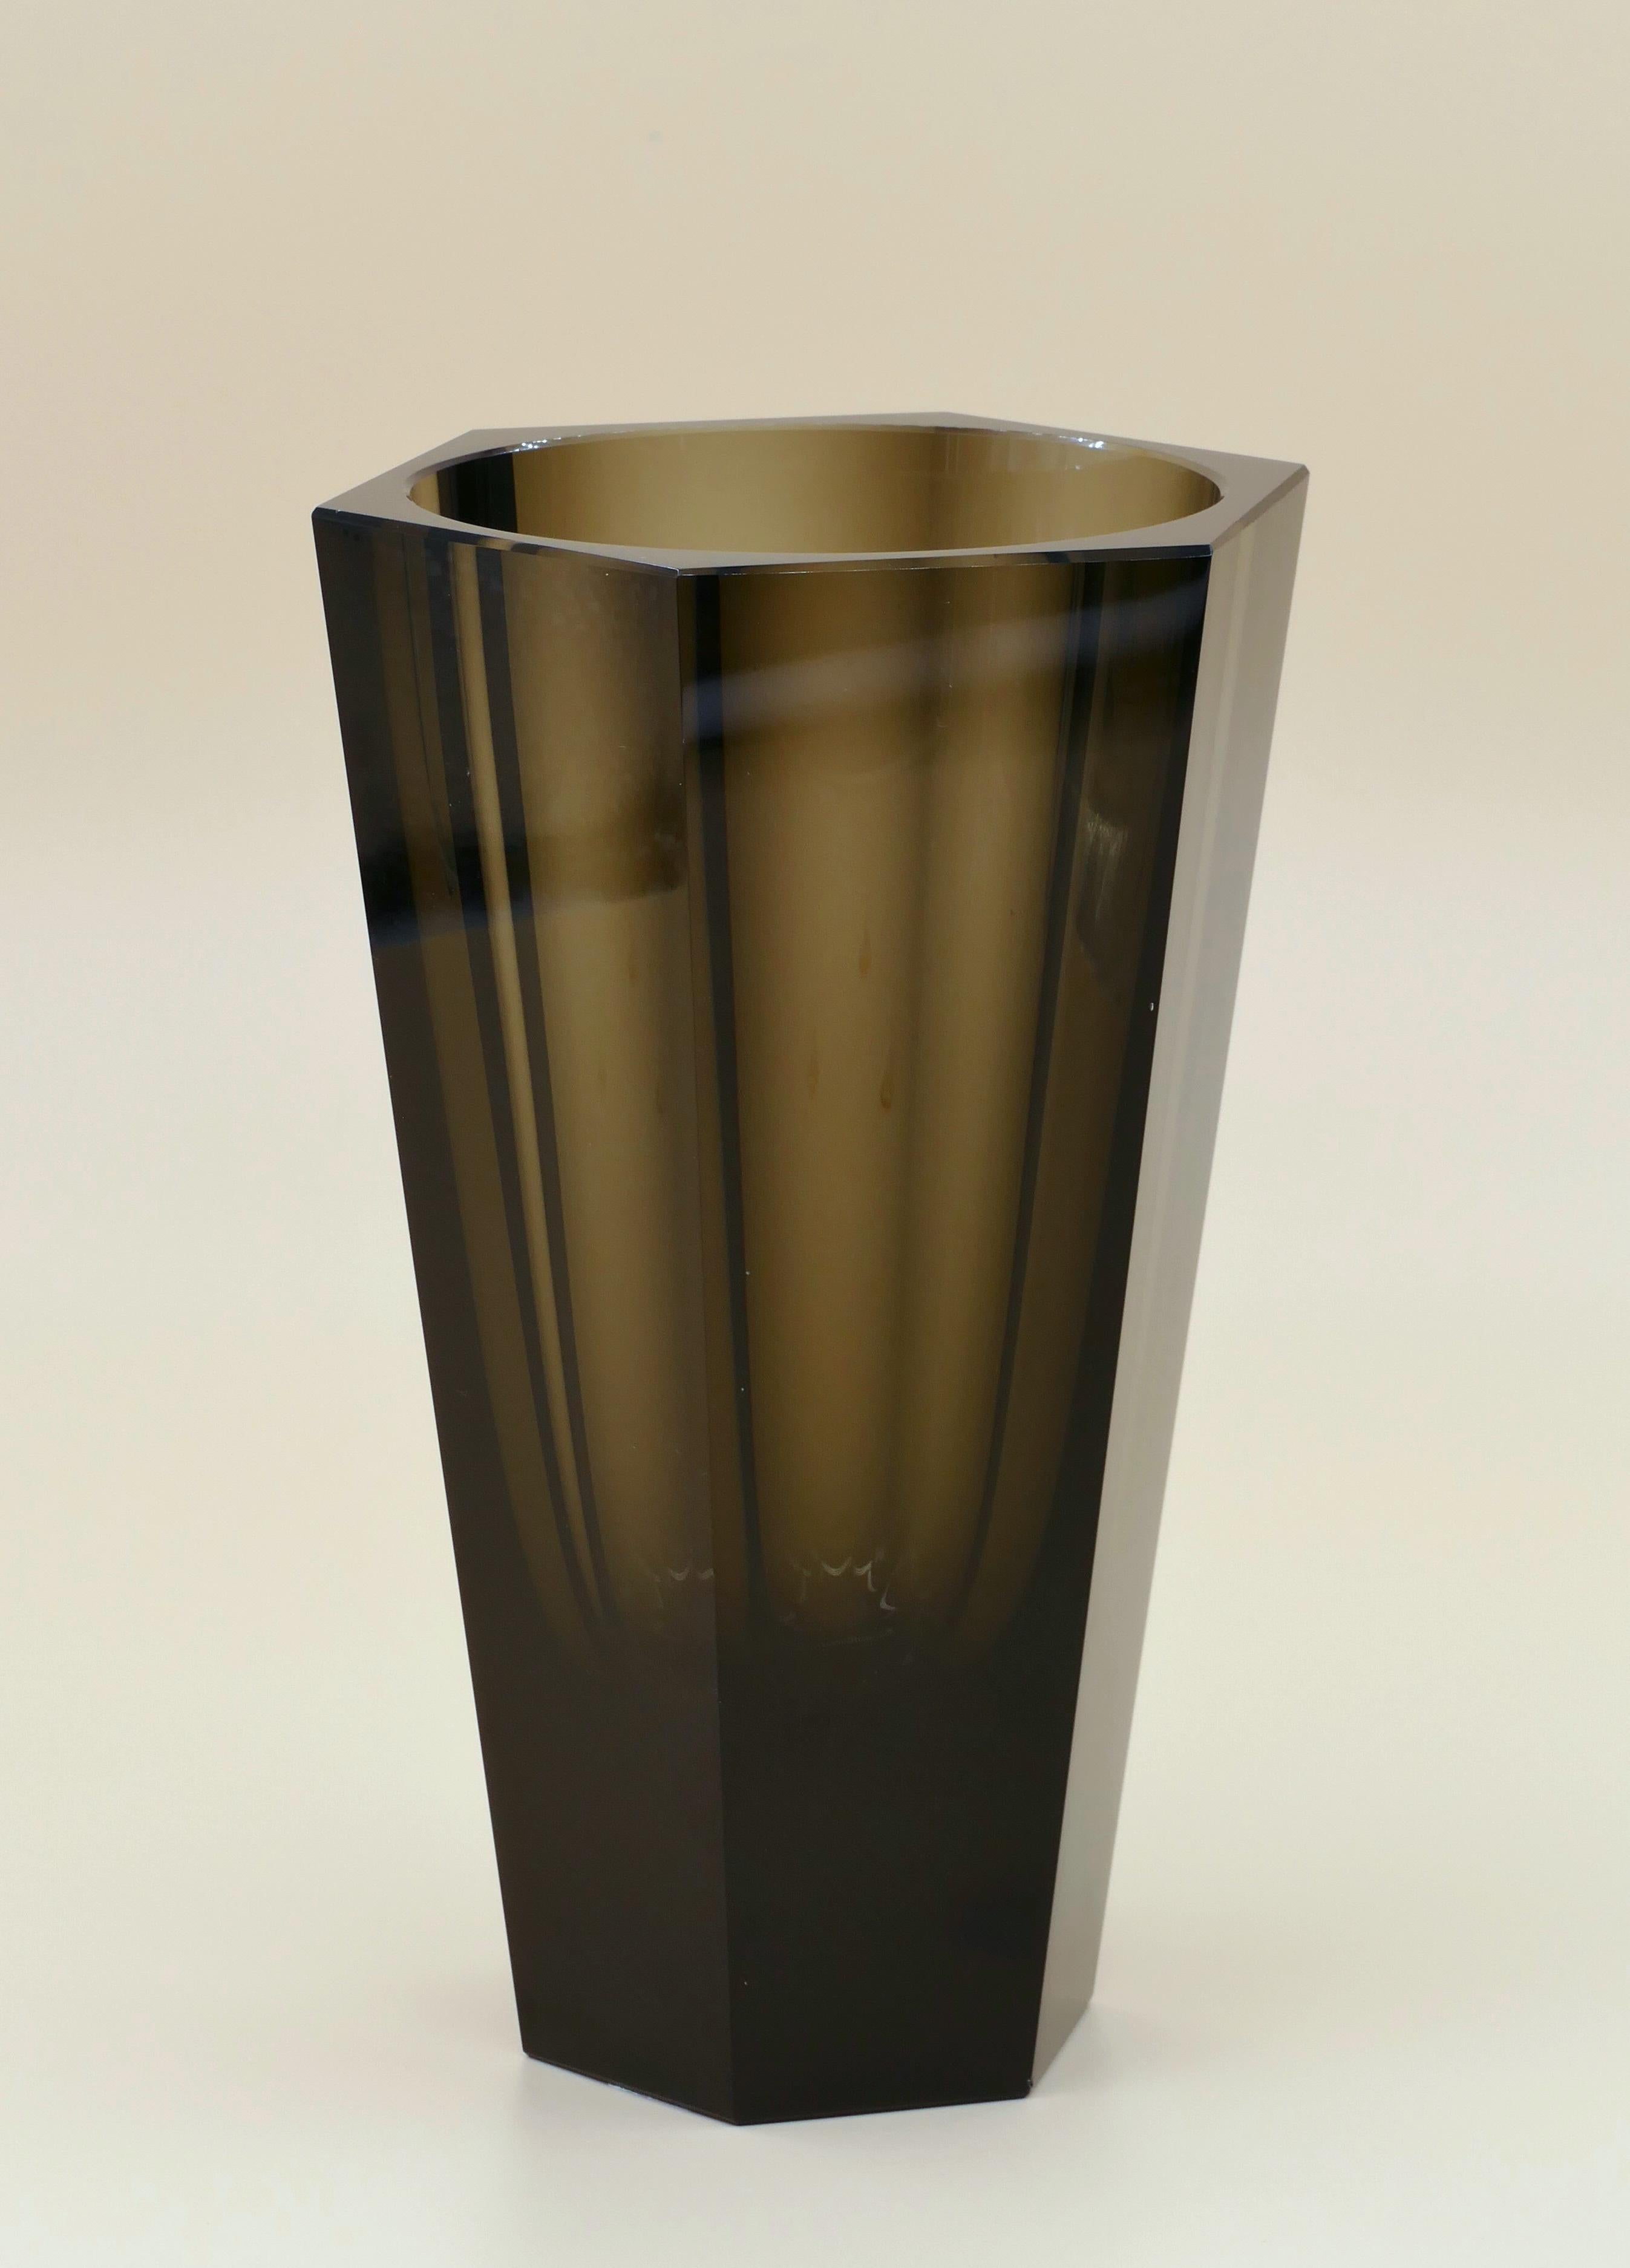 This Purity Moser vase is an original decorative glass vase realized in the 1970s.

This very precious cylindrical gray-colored glass vase is the purity model realized by the famous manufacturer Moser.

Founded in 1857 by Ludwig Moser & Sons,